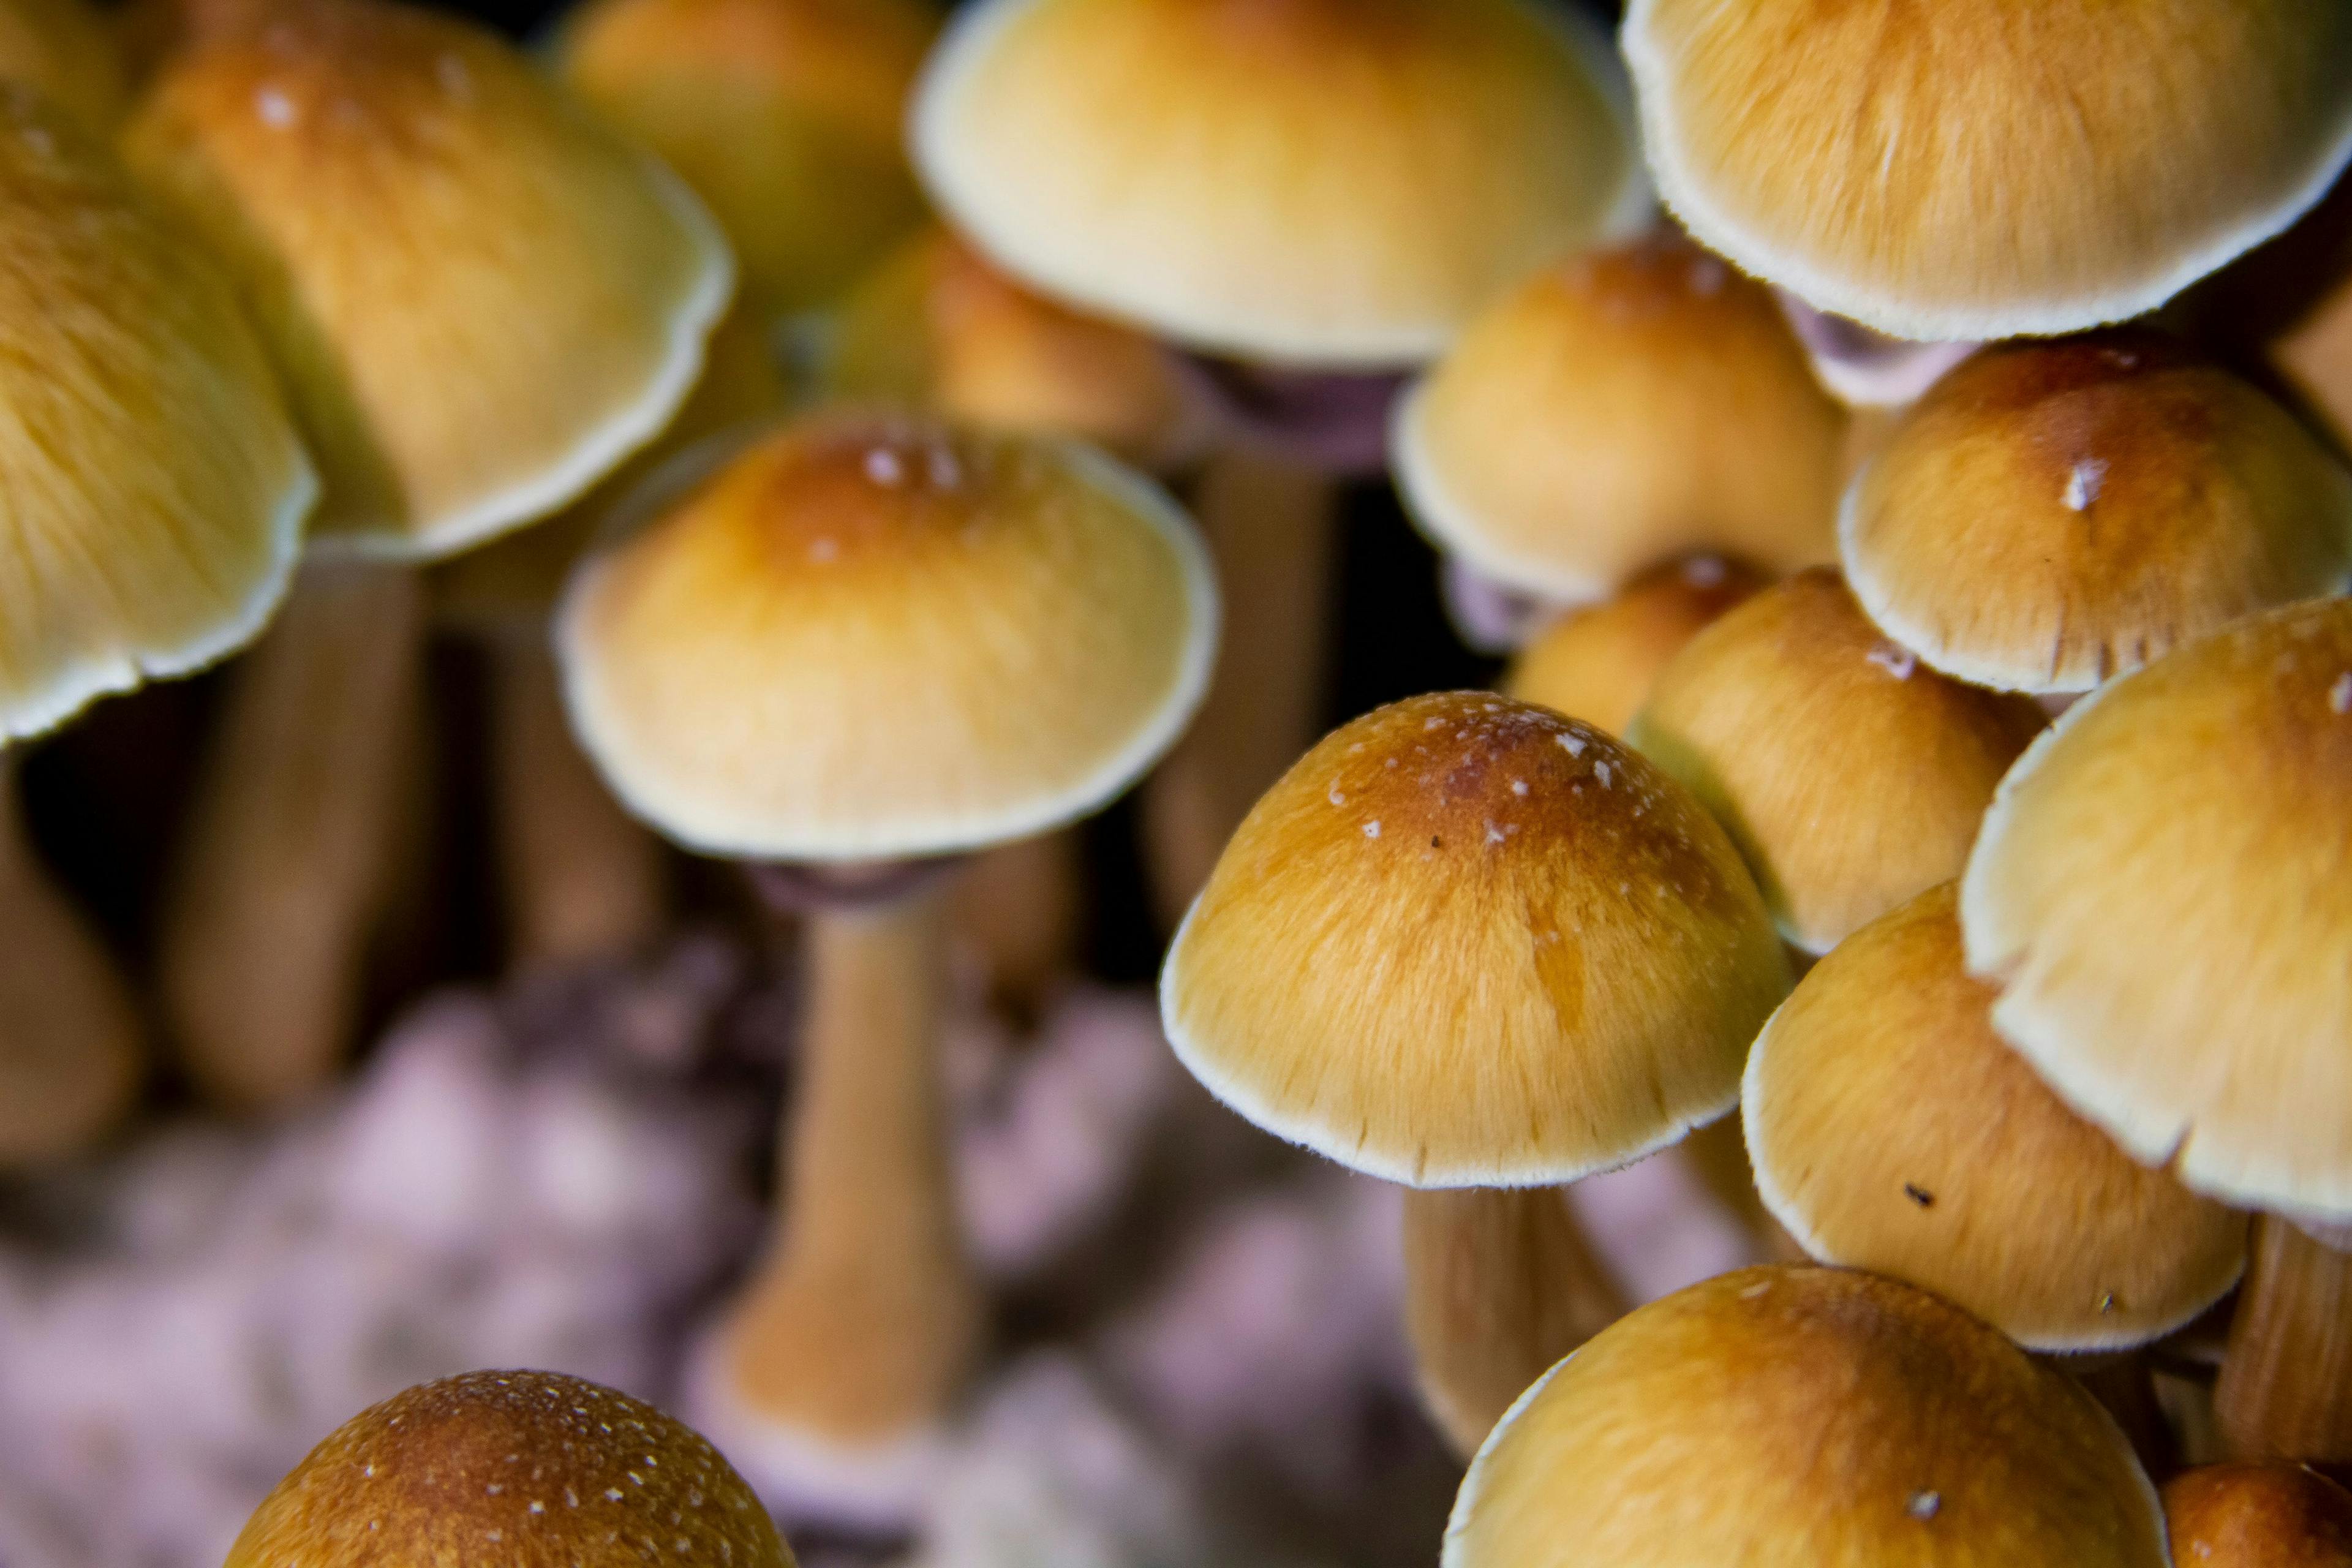 The Recent Resurgence of Psilocybin: Is It Here to Stay?